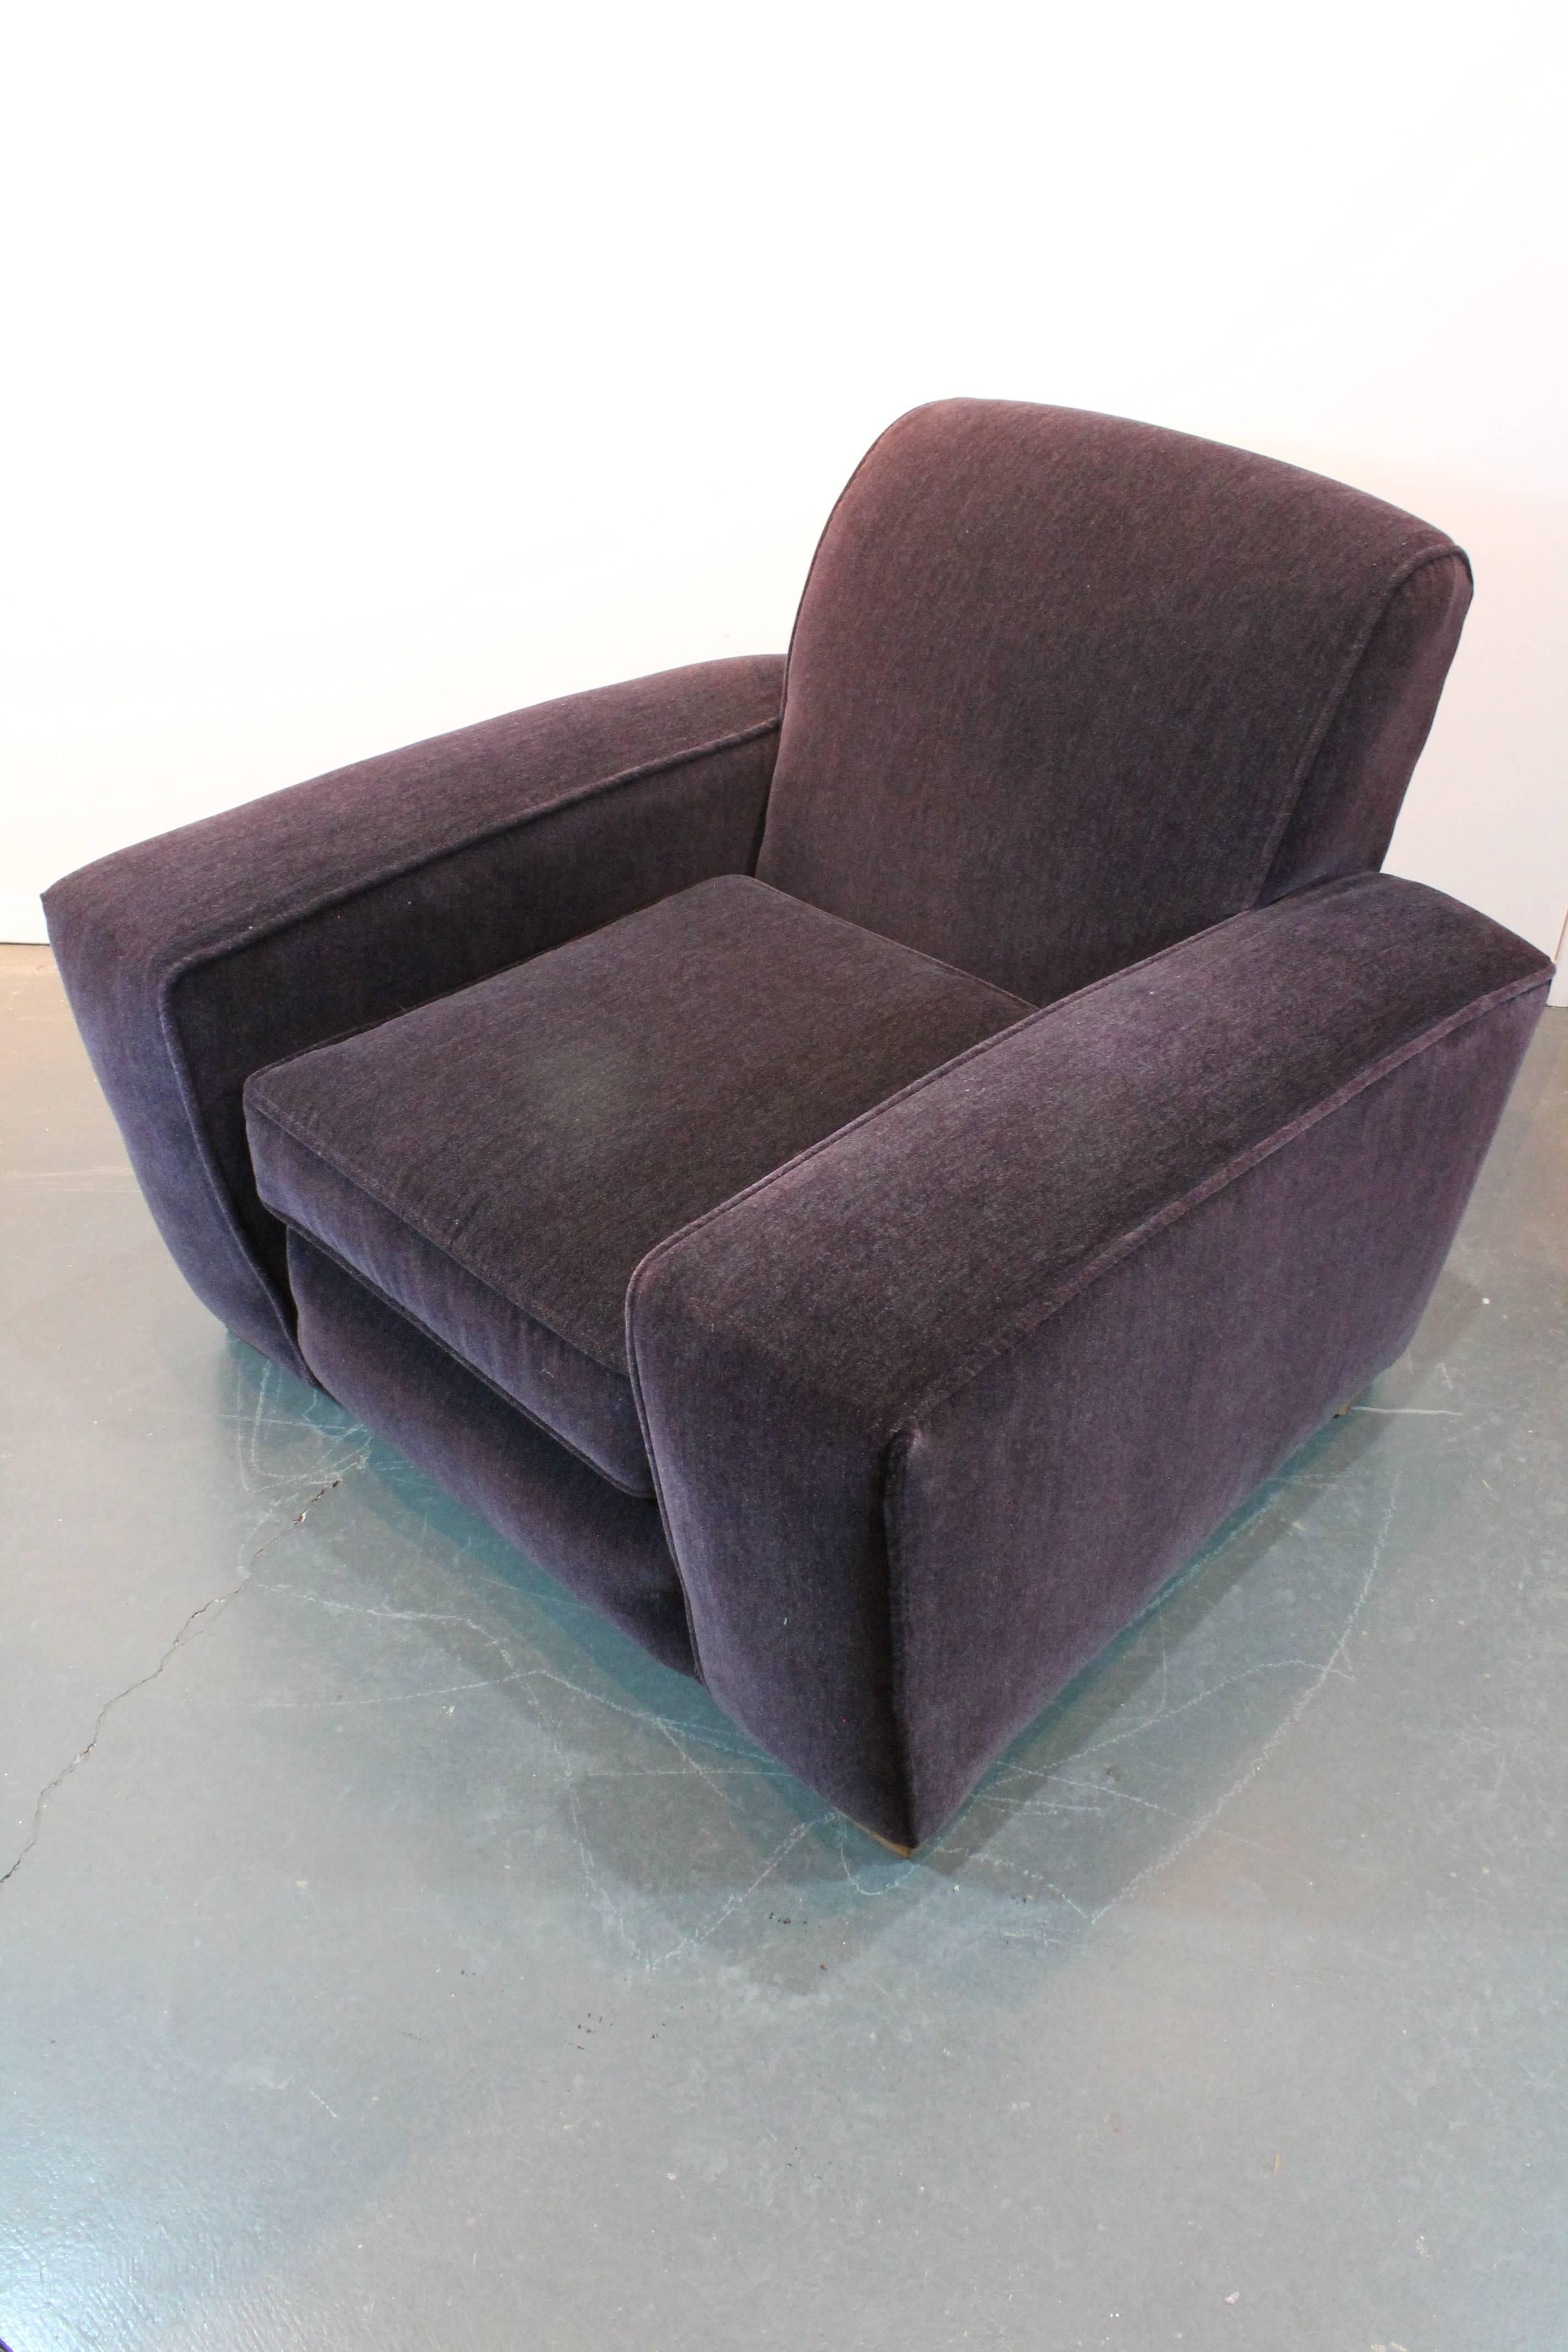 Art Deco Aubergine Mohair Lounge Chair In Good Condition For Sale In 3 Oaks, MI